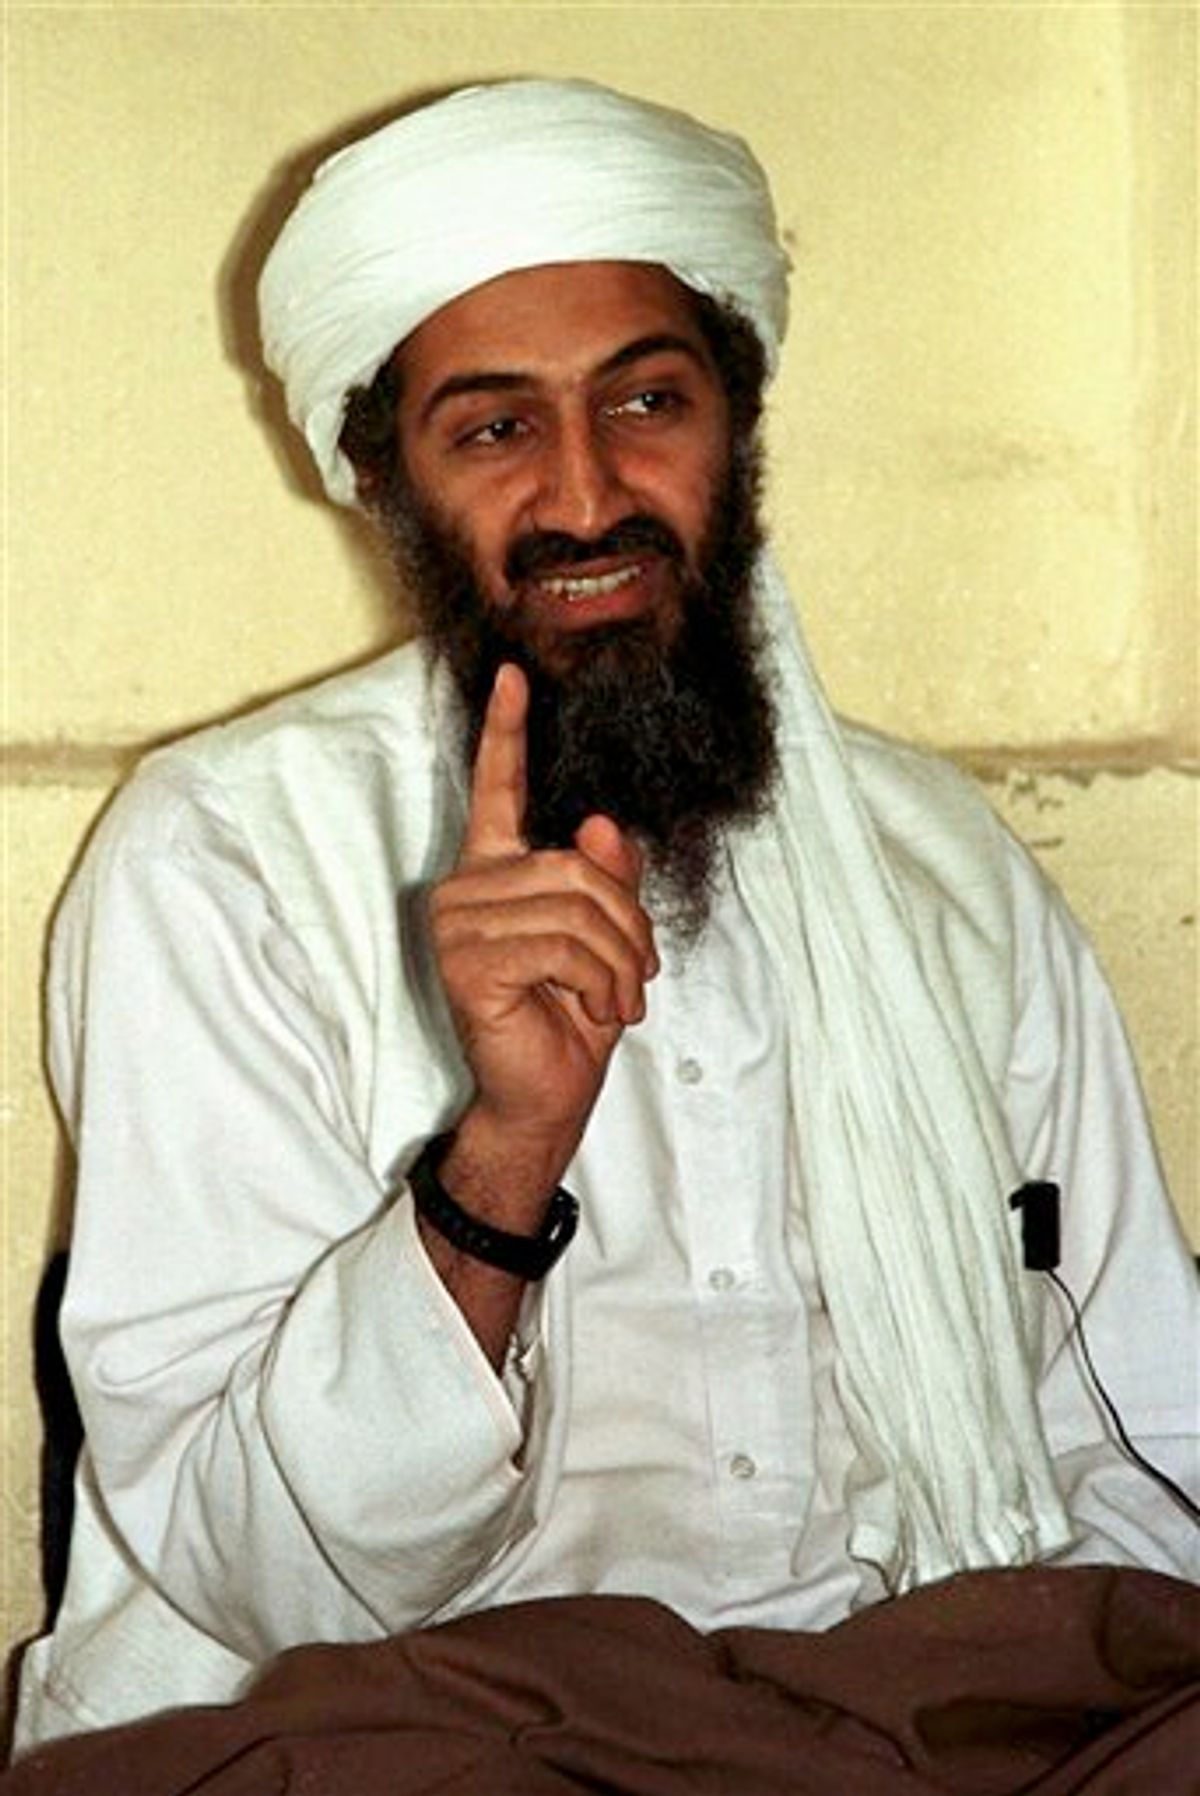 FILE - In this 1998 file photo, al Qaida leader Osama bin Laden is shown in Afghanistan. A person familiar with developments said Sunday, May 1, 2011 that bin Laden is dead and the U.S. has the body. (AP File Photo) (AP)